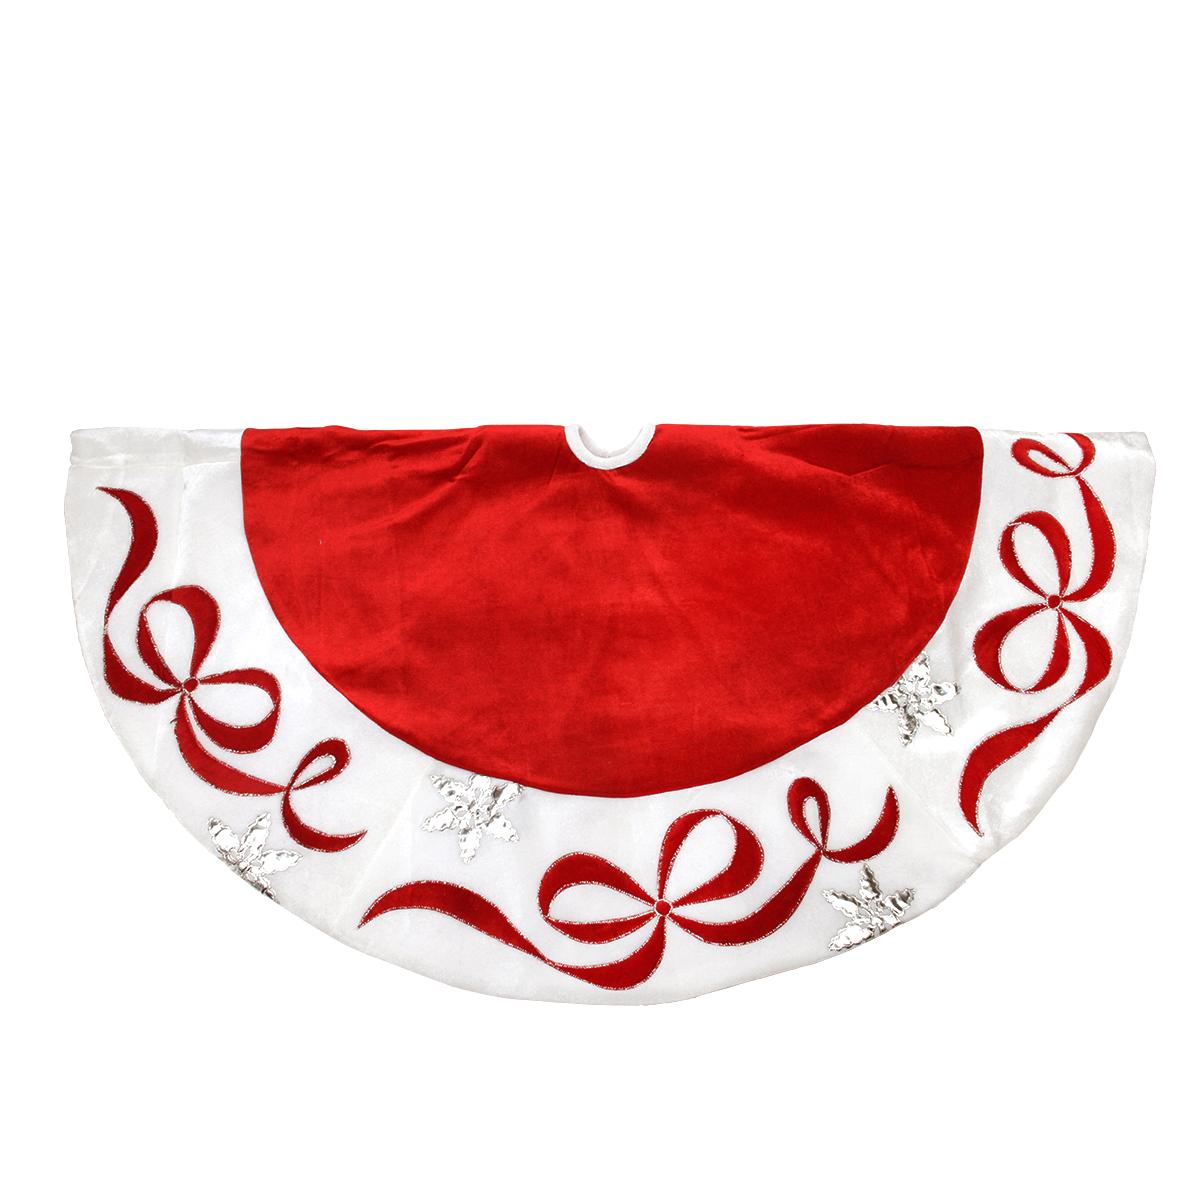 48" Red & White Velveteen Christmas Tree Skirt with Bow & Snowflake Appliques